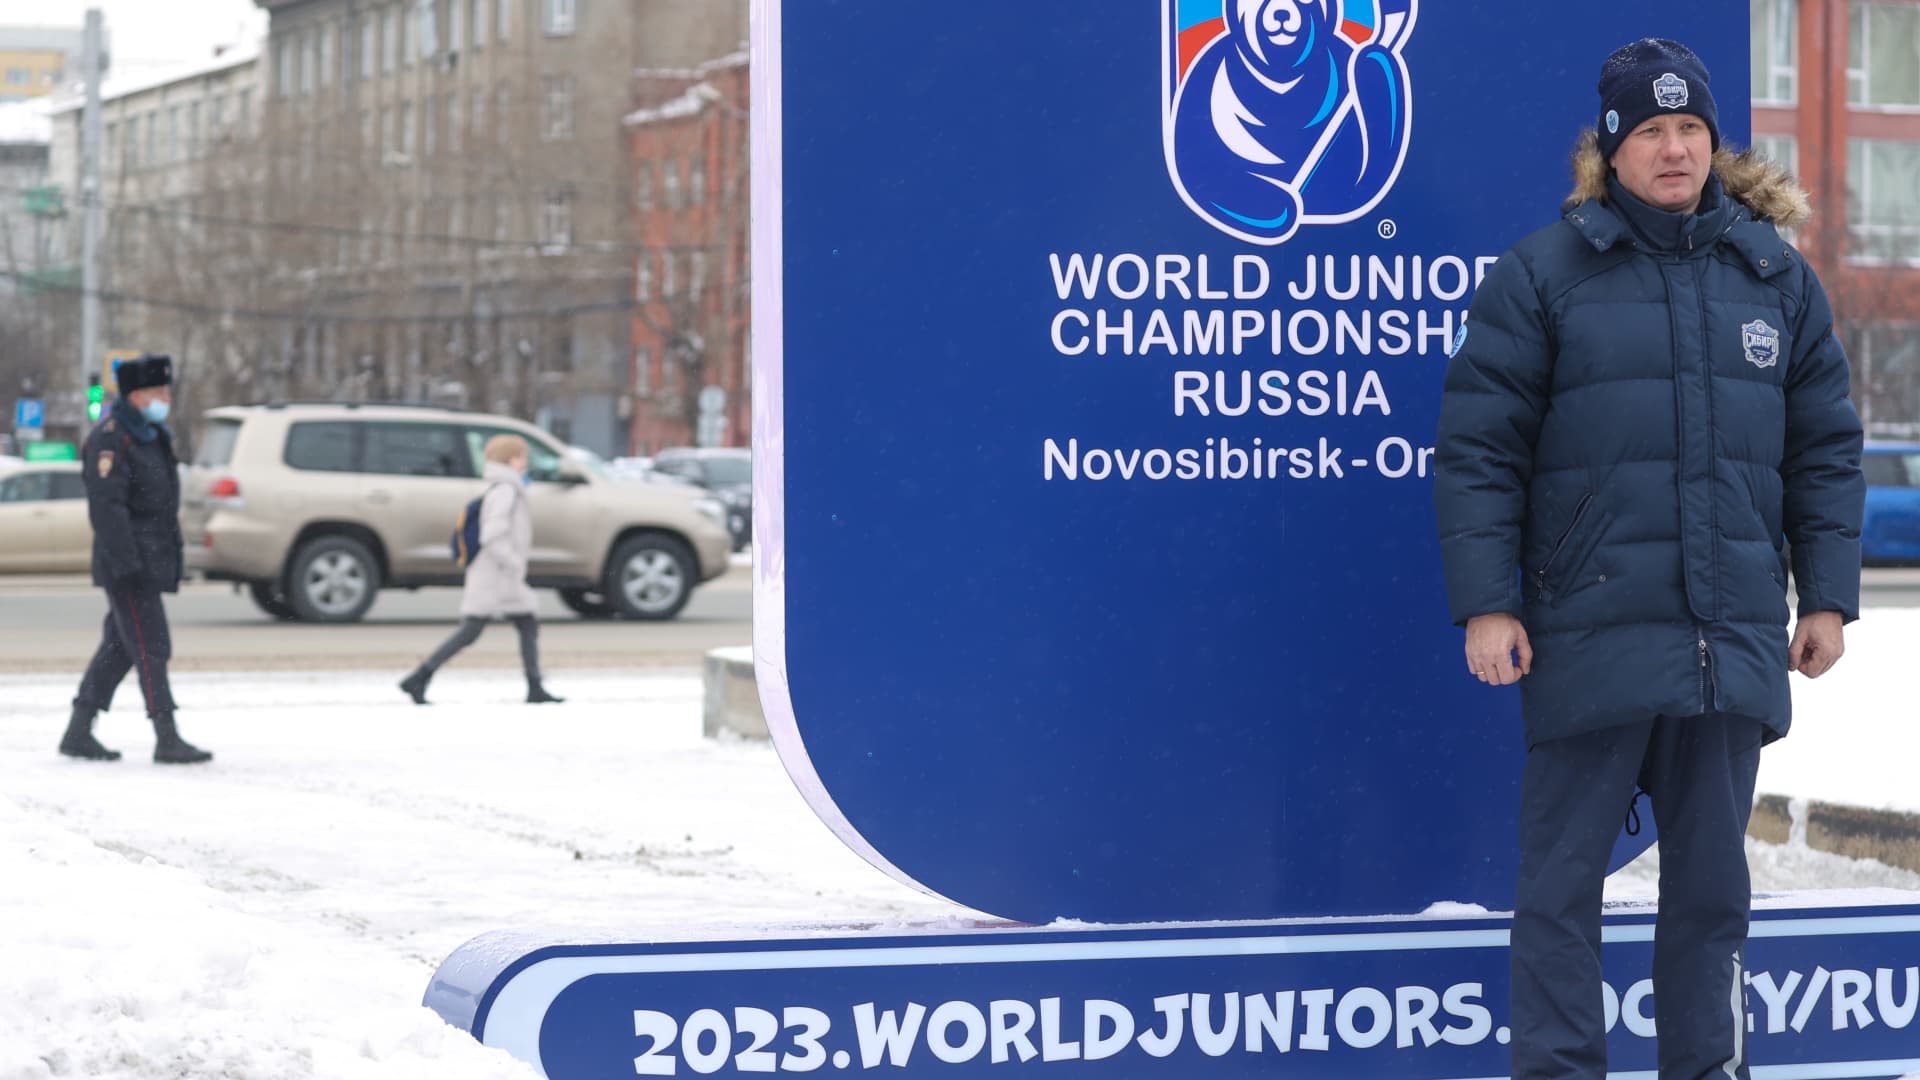 A man poses in front of the 2023 IIHF World Junior Championship countdown clock set going in the Teatralny garden square; the 47th edition of the World Juniors is scheduled to start in Russia's Siberian cities of Novosibirsk and Omsk on December 26, 2022, and last until January 5, 2023.